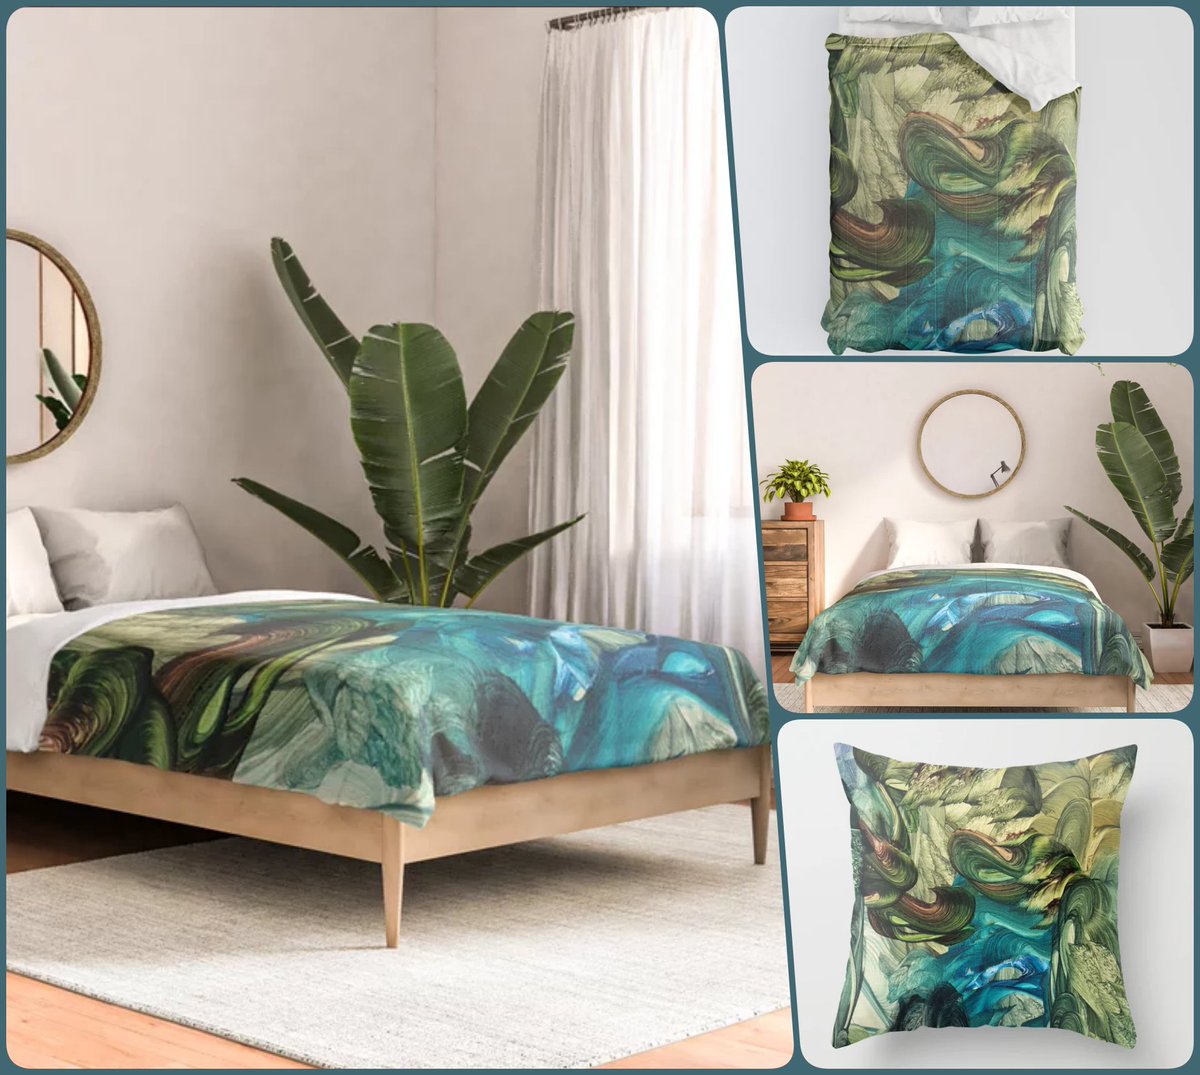 *SALE 30% Off* 
Seven of Wands Comforter~Refresh your Decor~ #artfalaxy #art #bedroom #pillows #homedecor #society6 #Society6max #swirls #modern #trendy #accessories #accents #shower #bath #comforters #duvets #blankets #shams #teal #blue #green #yellow

society6.com/product/seven-…